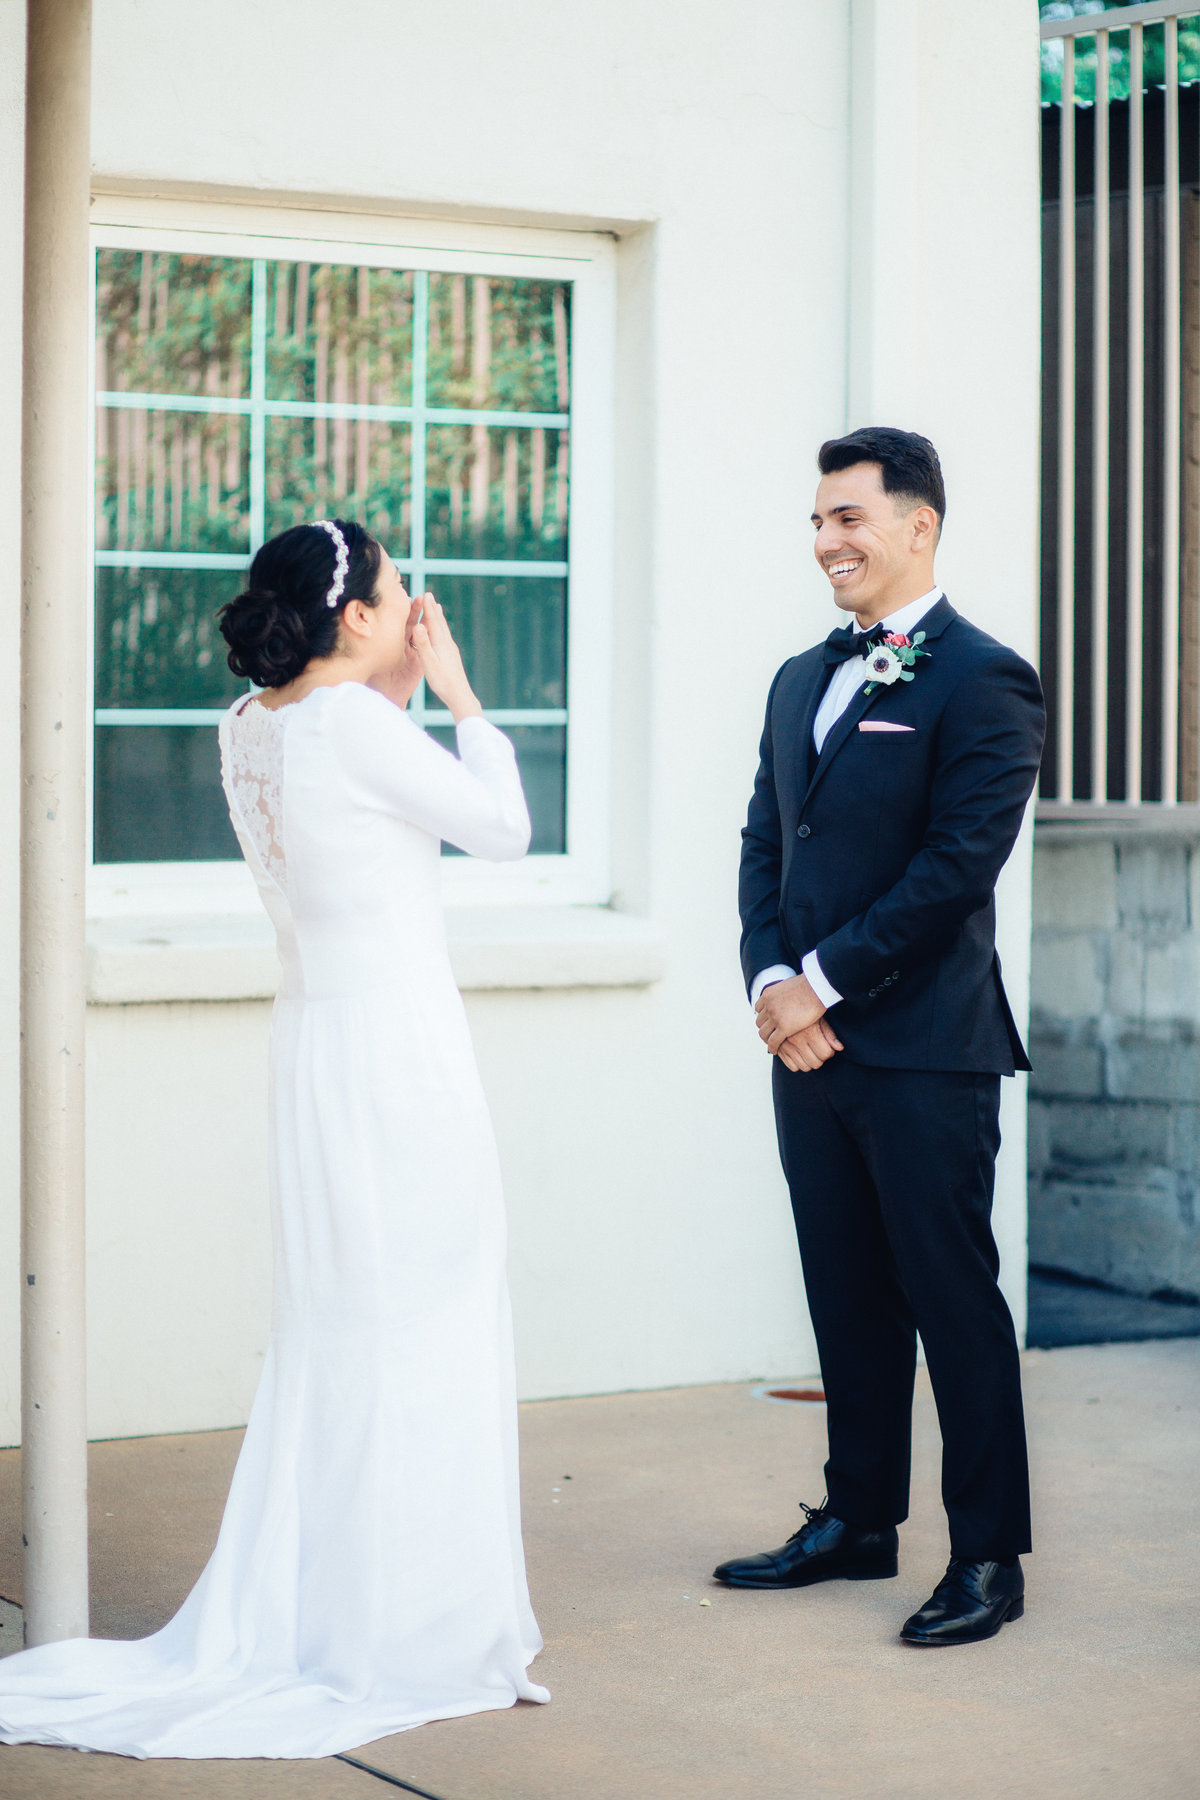 Wedding Photograph Of Bride Smiling at Her Groom Los Angeles